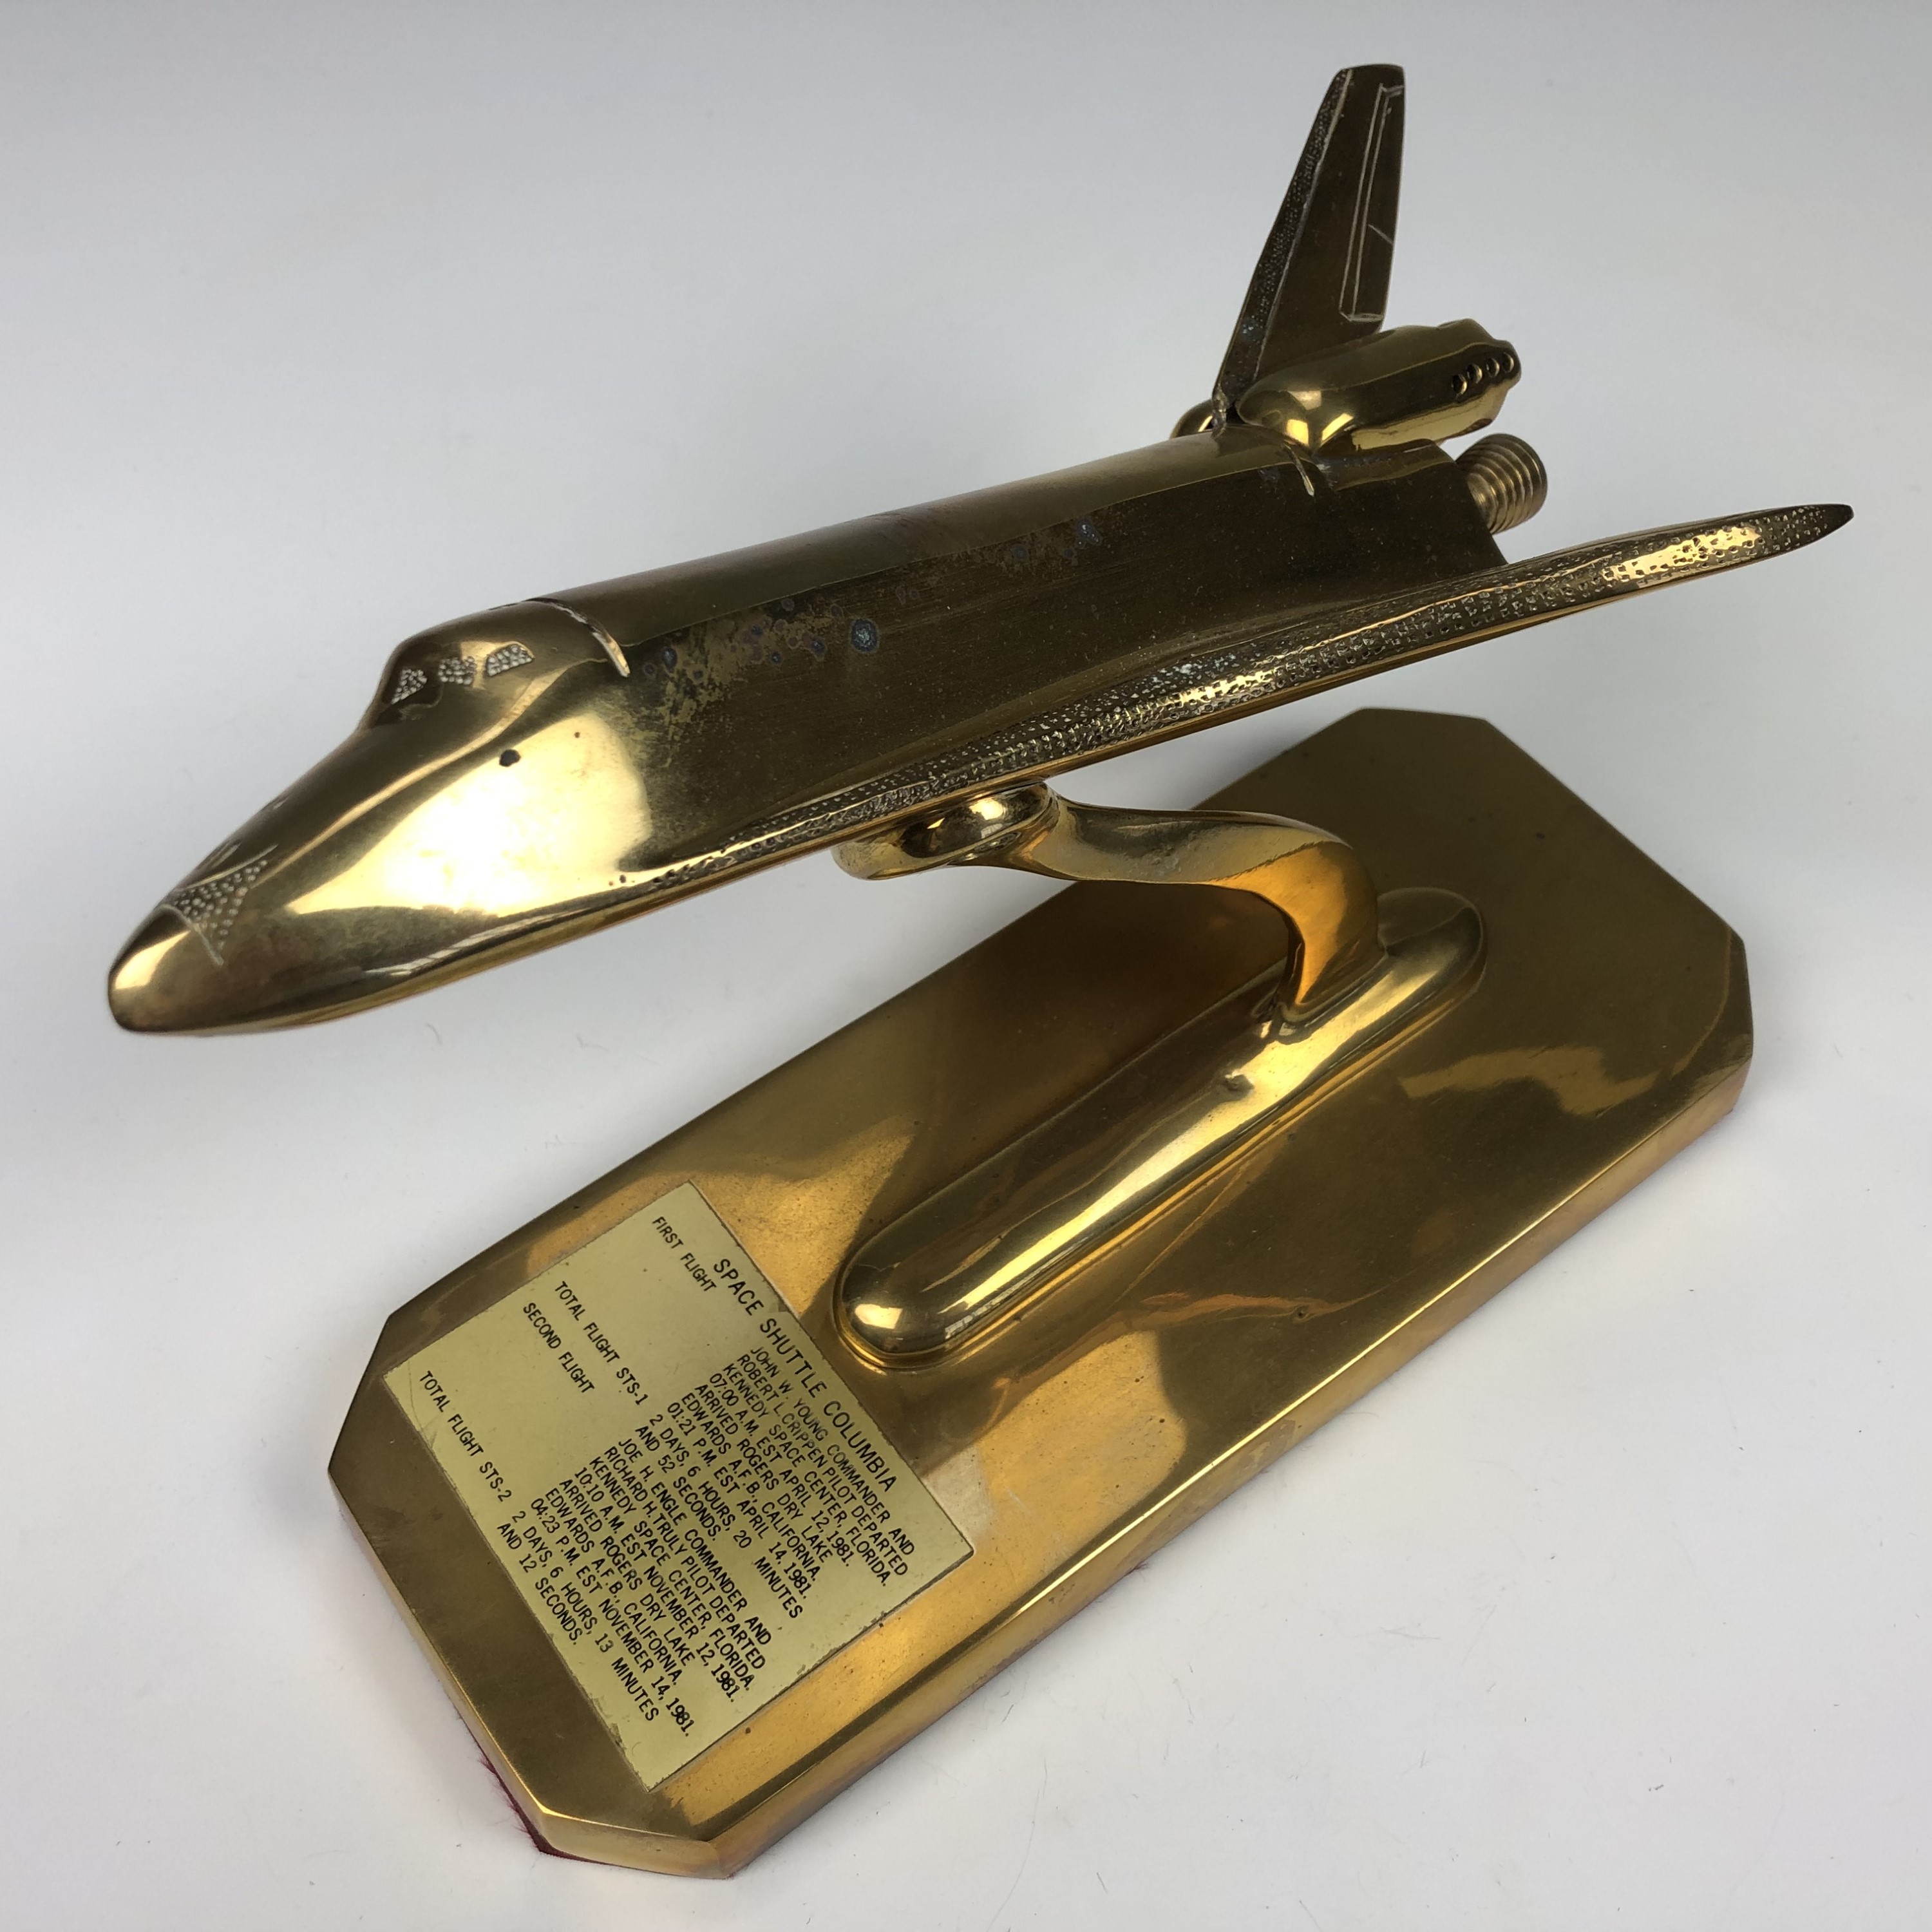 A brass desk model of the Space Shuttle Columbia, 24 cm x 10 cm x 17 cm high - Image 4 of 4